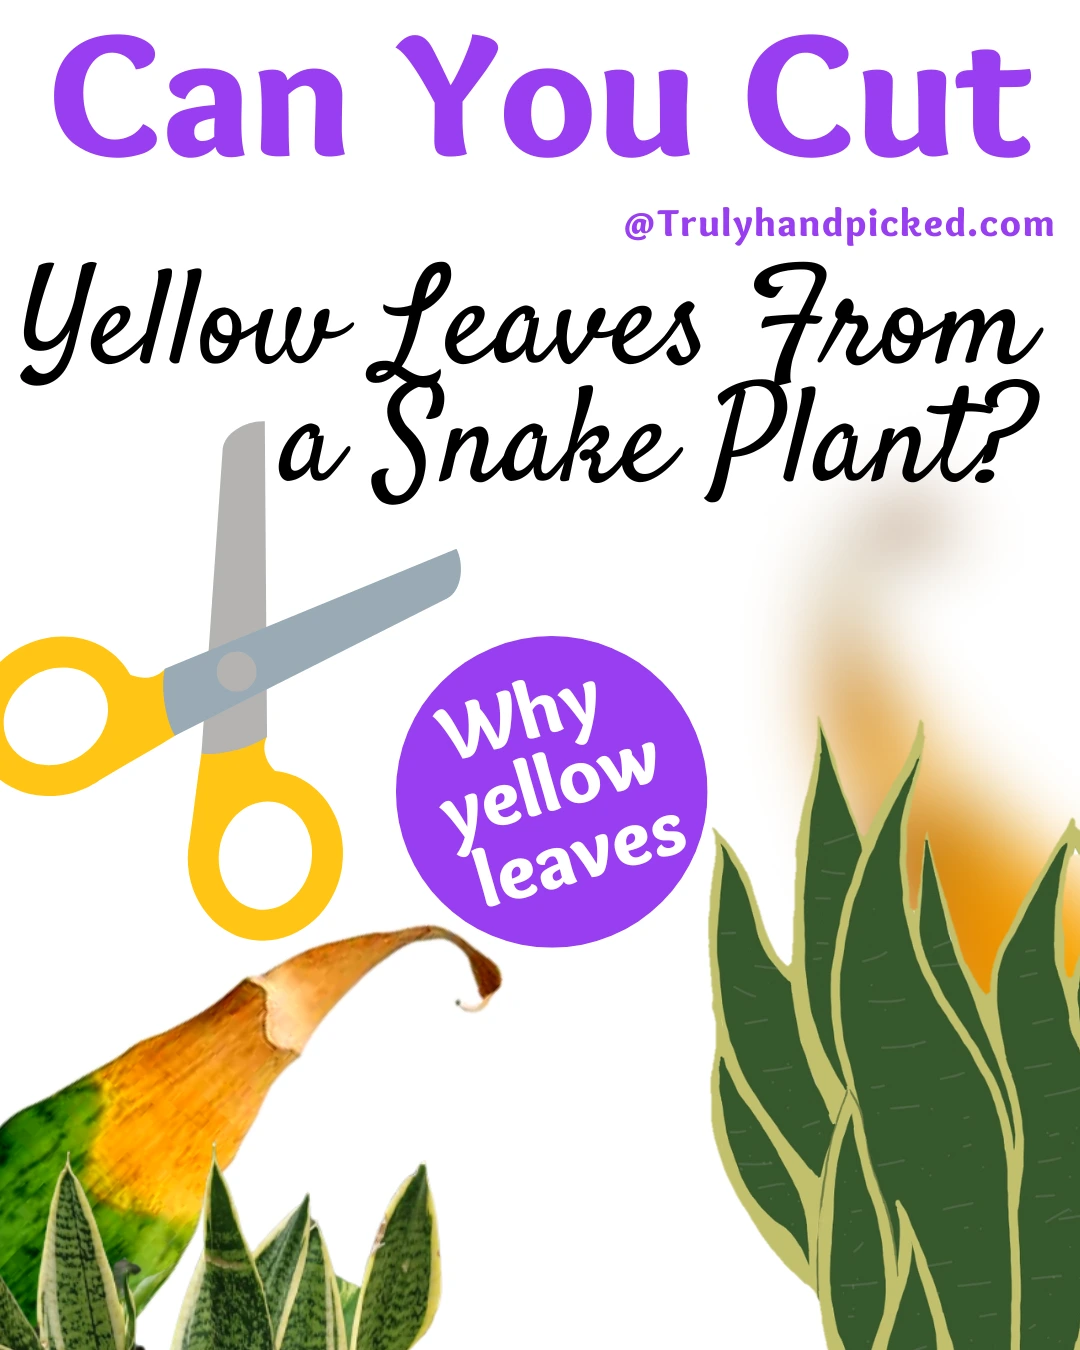 Can You Cut Yellow Leaves From a Snake Plant